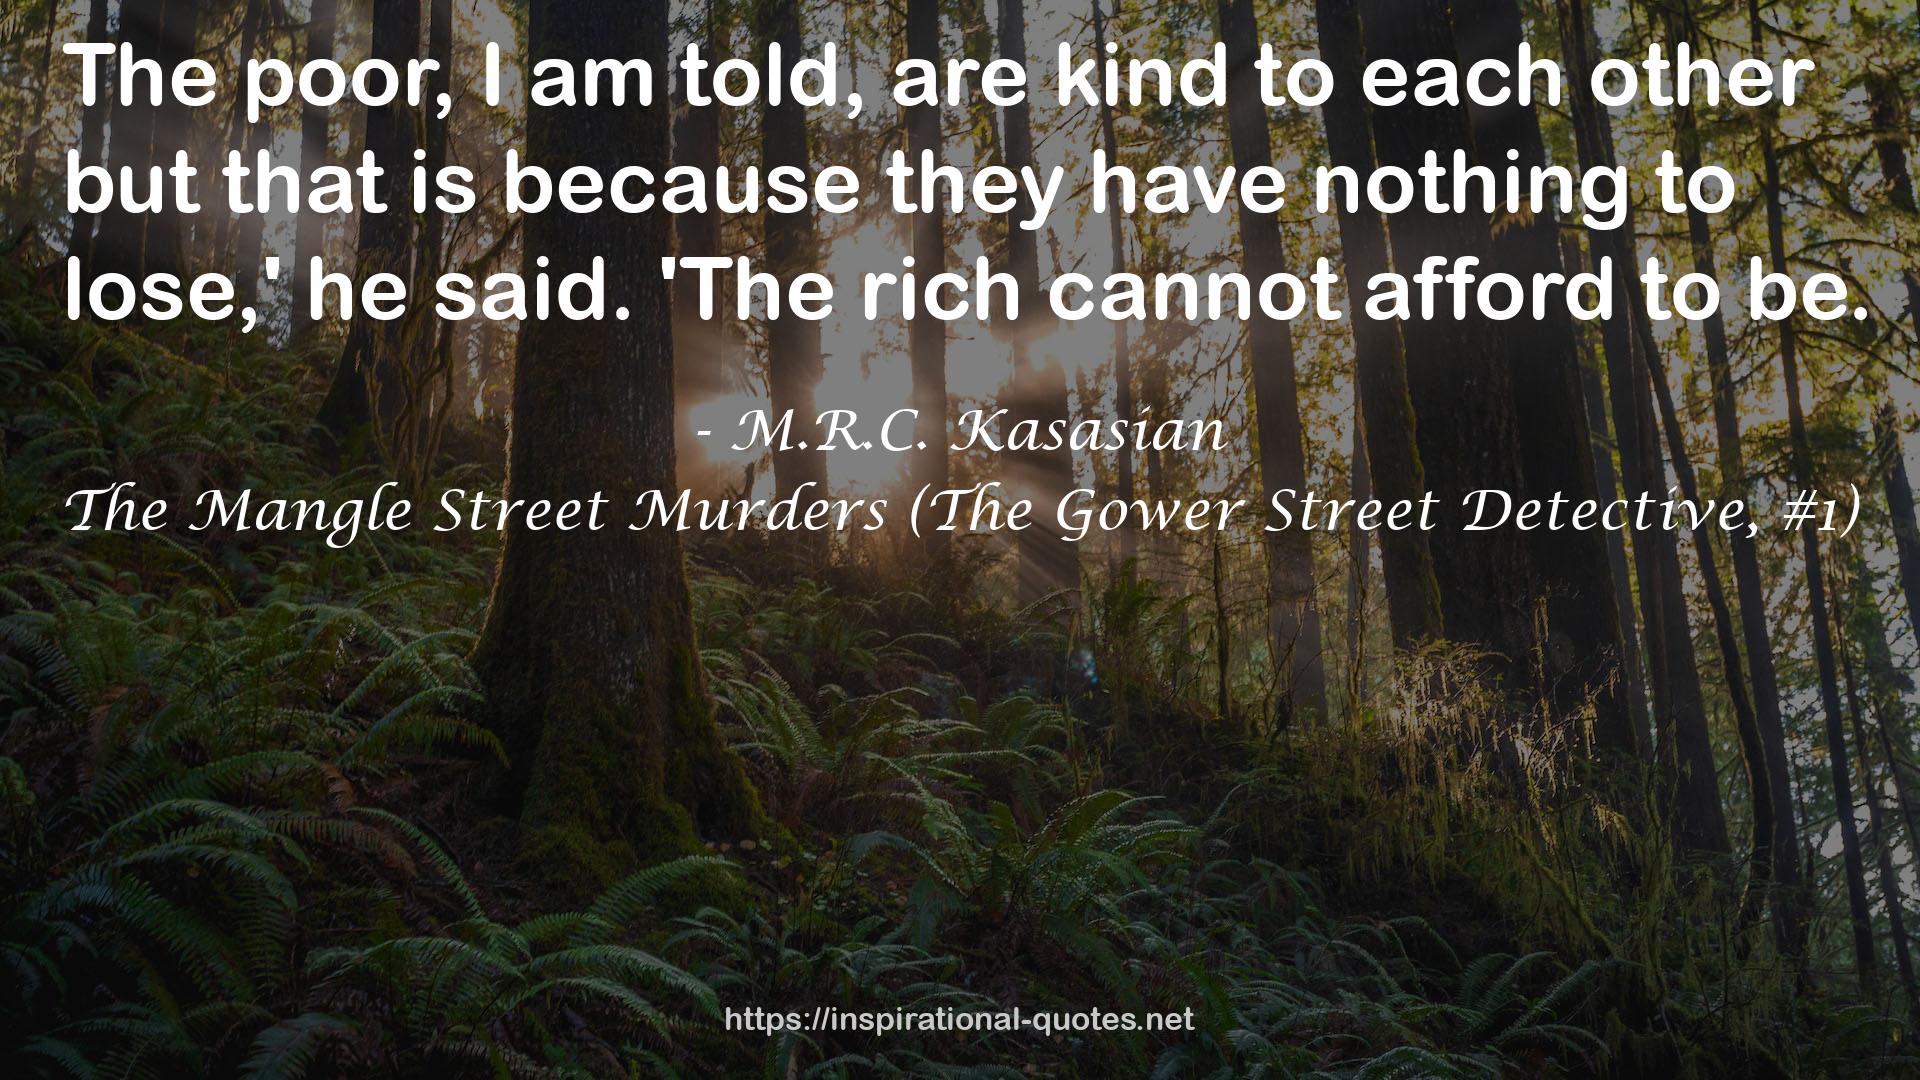 The Mangle Street Murders (The Gower Street Detective, #1) QUOTES